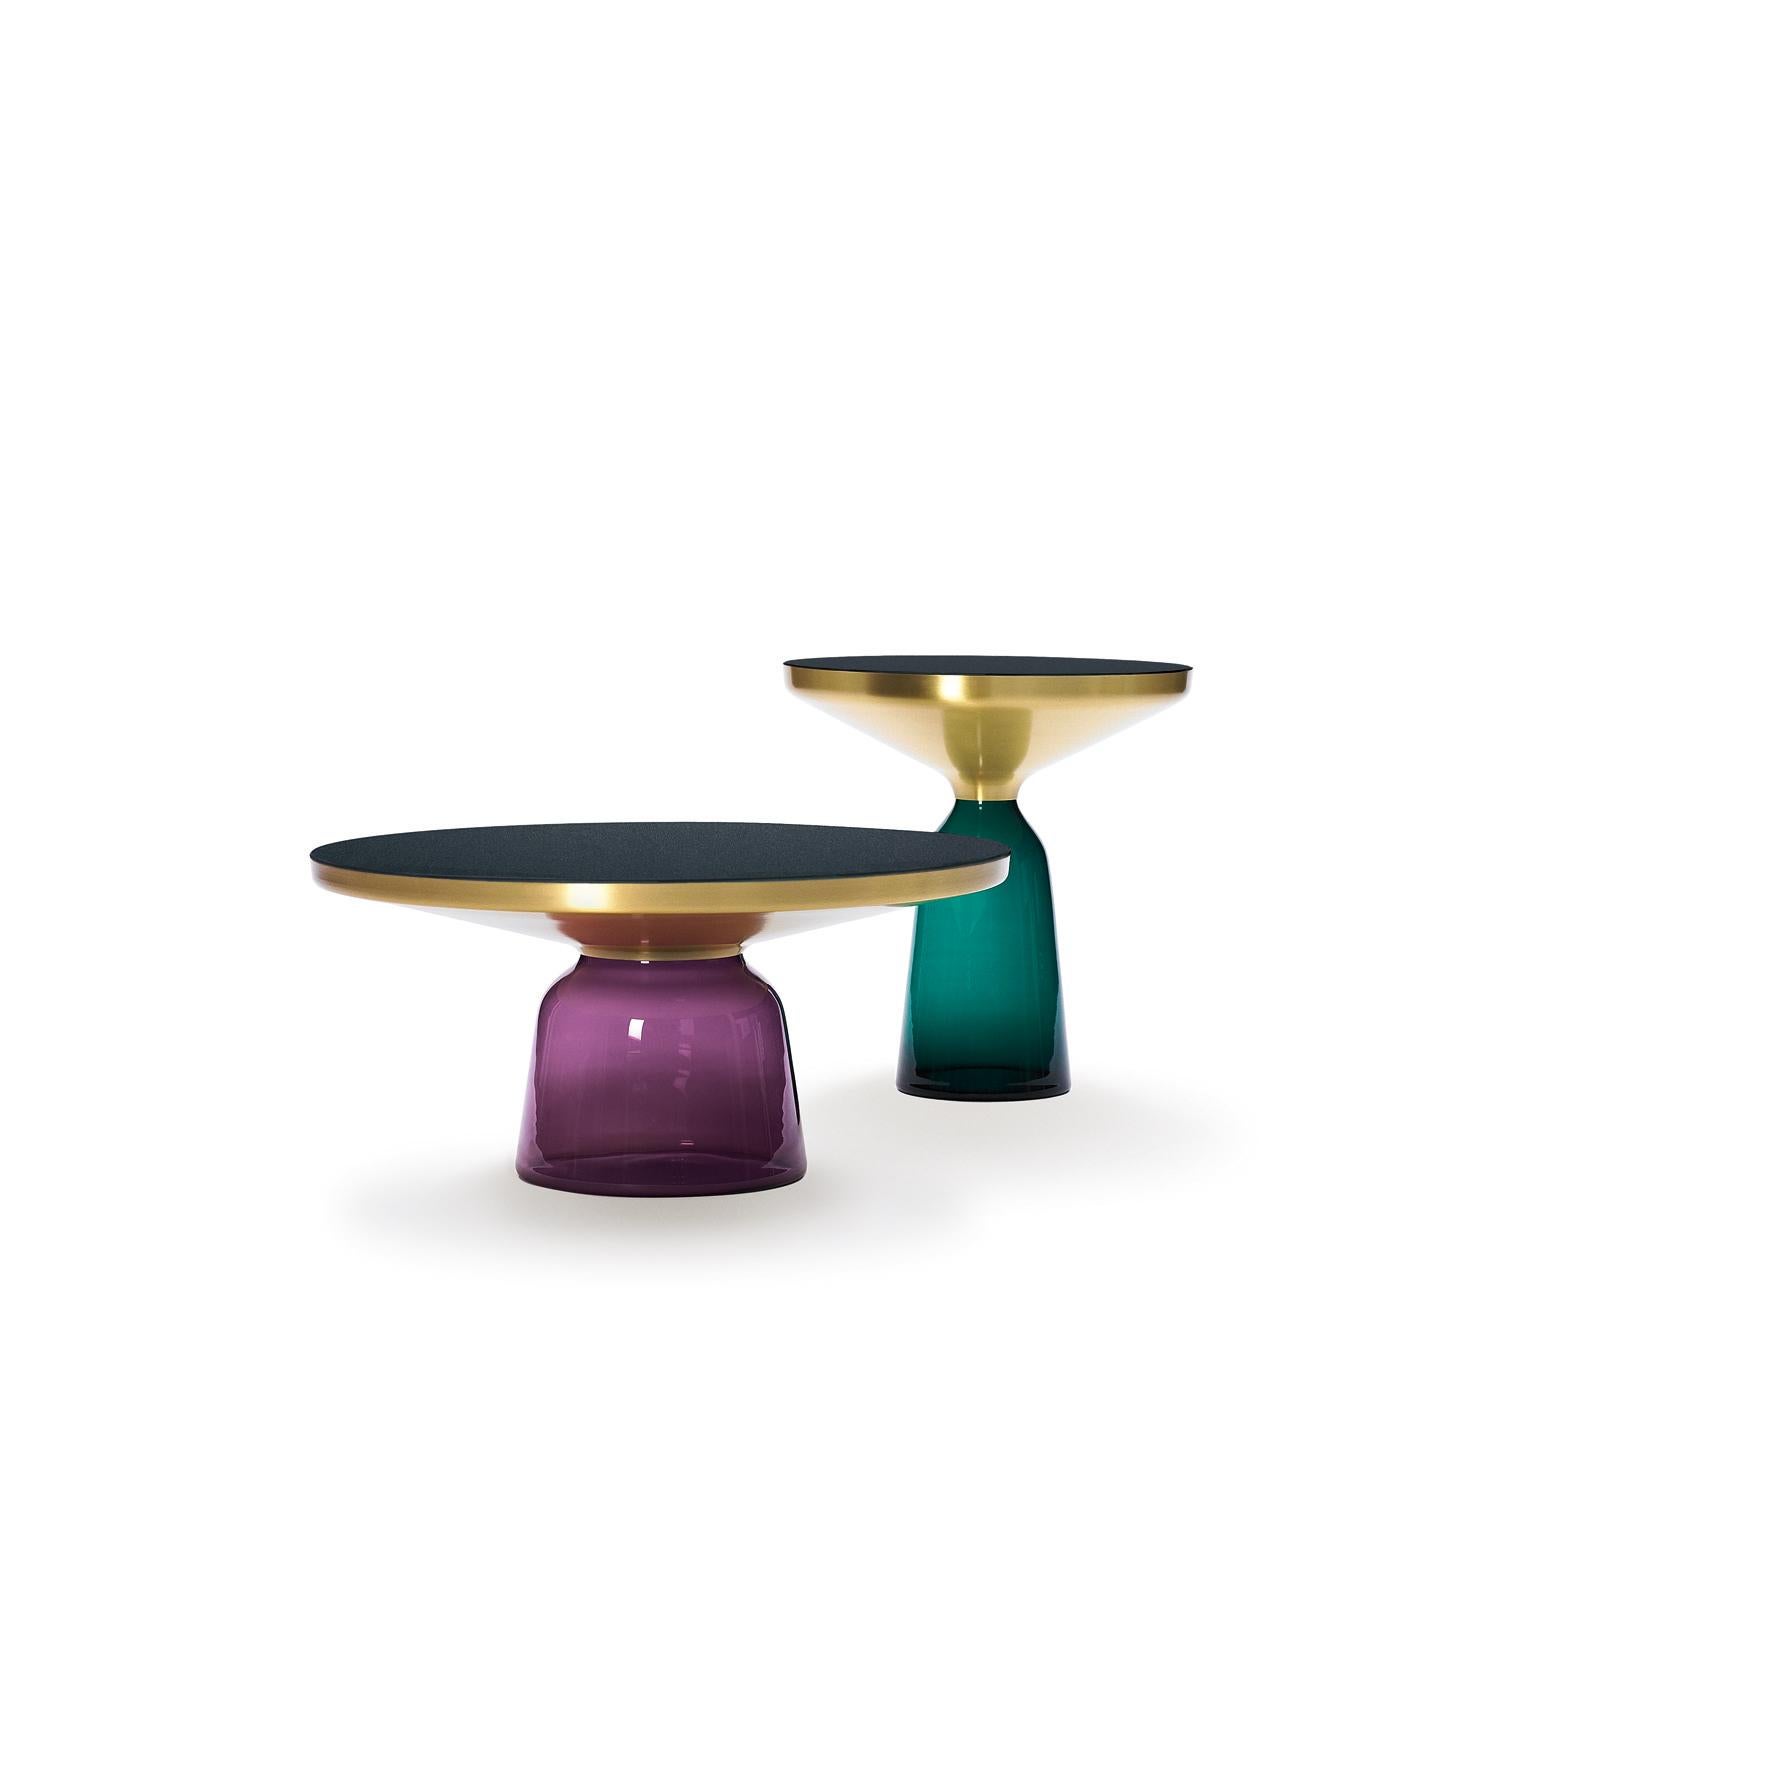 A modern Classic as miniature: the Bell table by Sebastian Herkner turns our perceptual habits on their head, using the lightweight, fragile material of glass as base for a metal top that seems to float above it. hand blown in the traditional manner